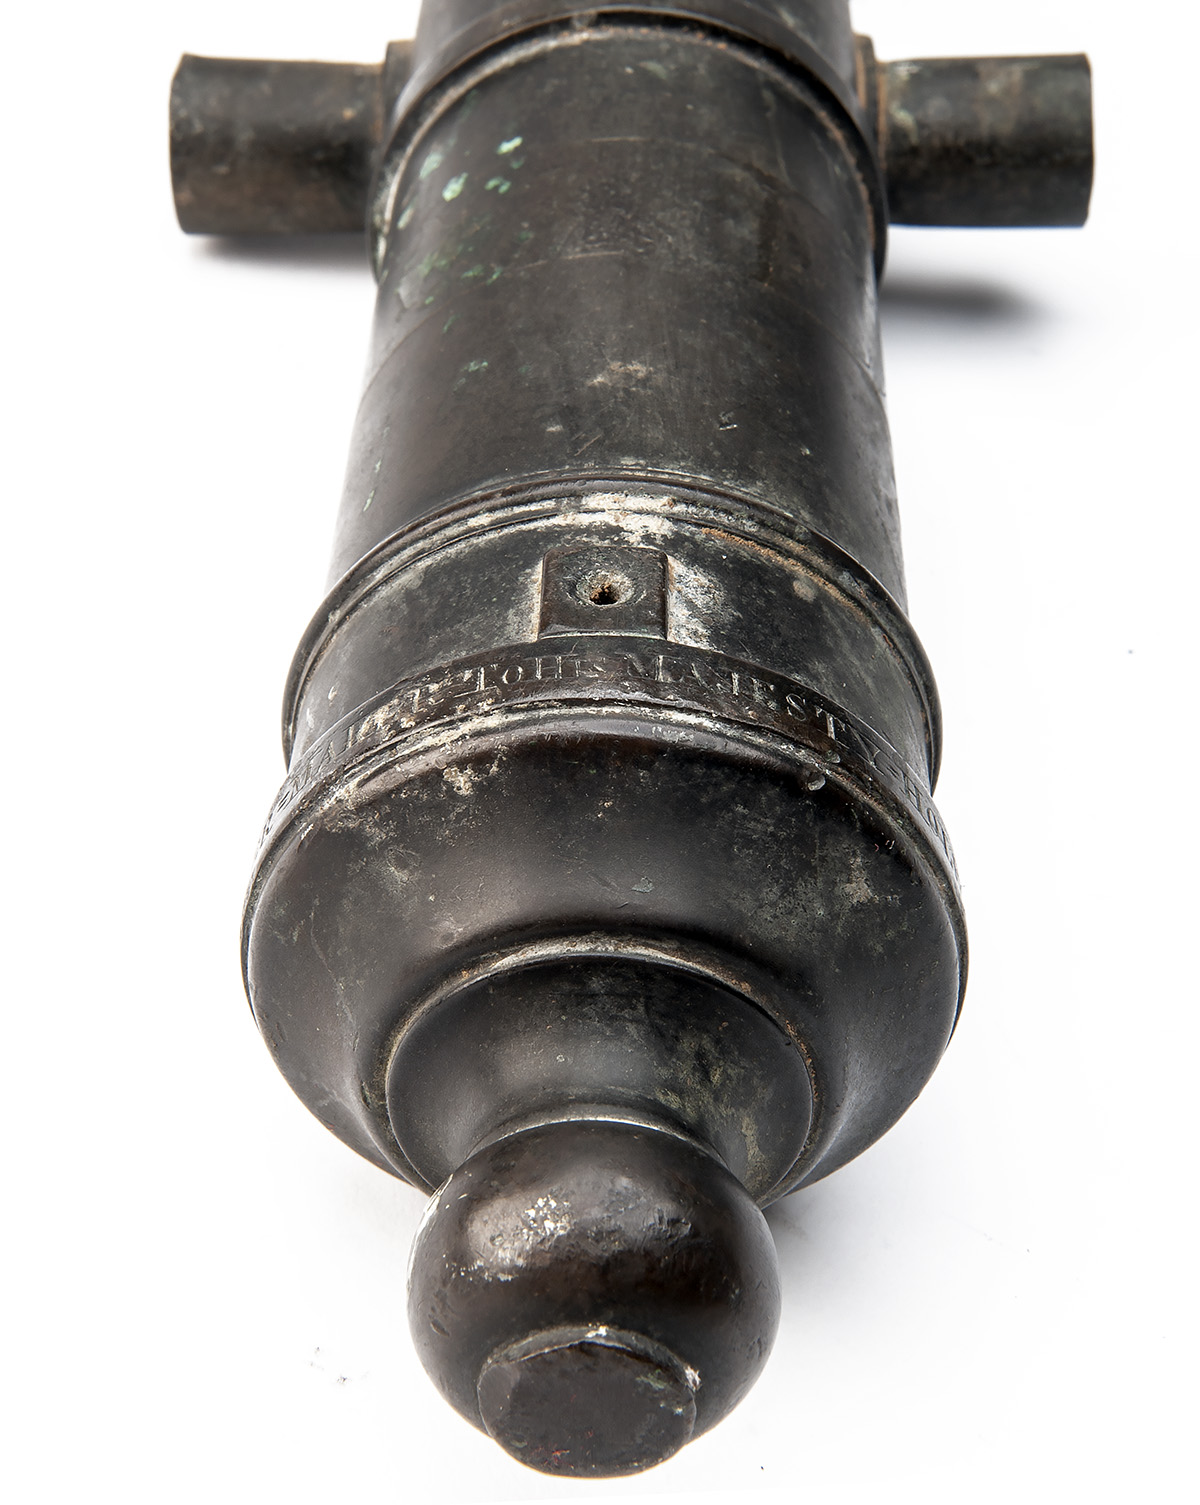 W. PARKER, LONDON A RARE PAIR OF 10-BORE BRONZE LAWN or YACHTING CANNON BARRELS, no visible serial - Image 3 of 5